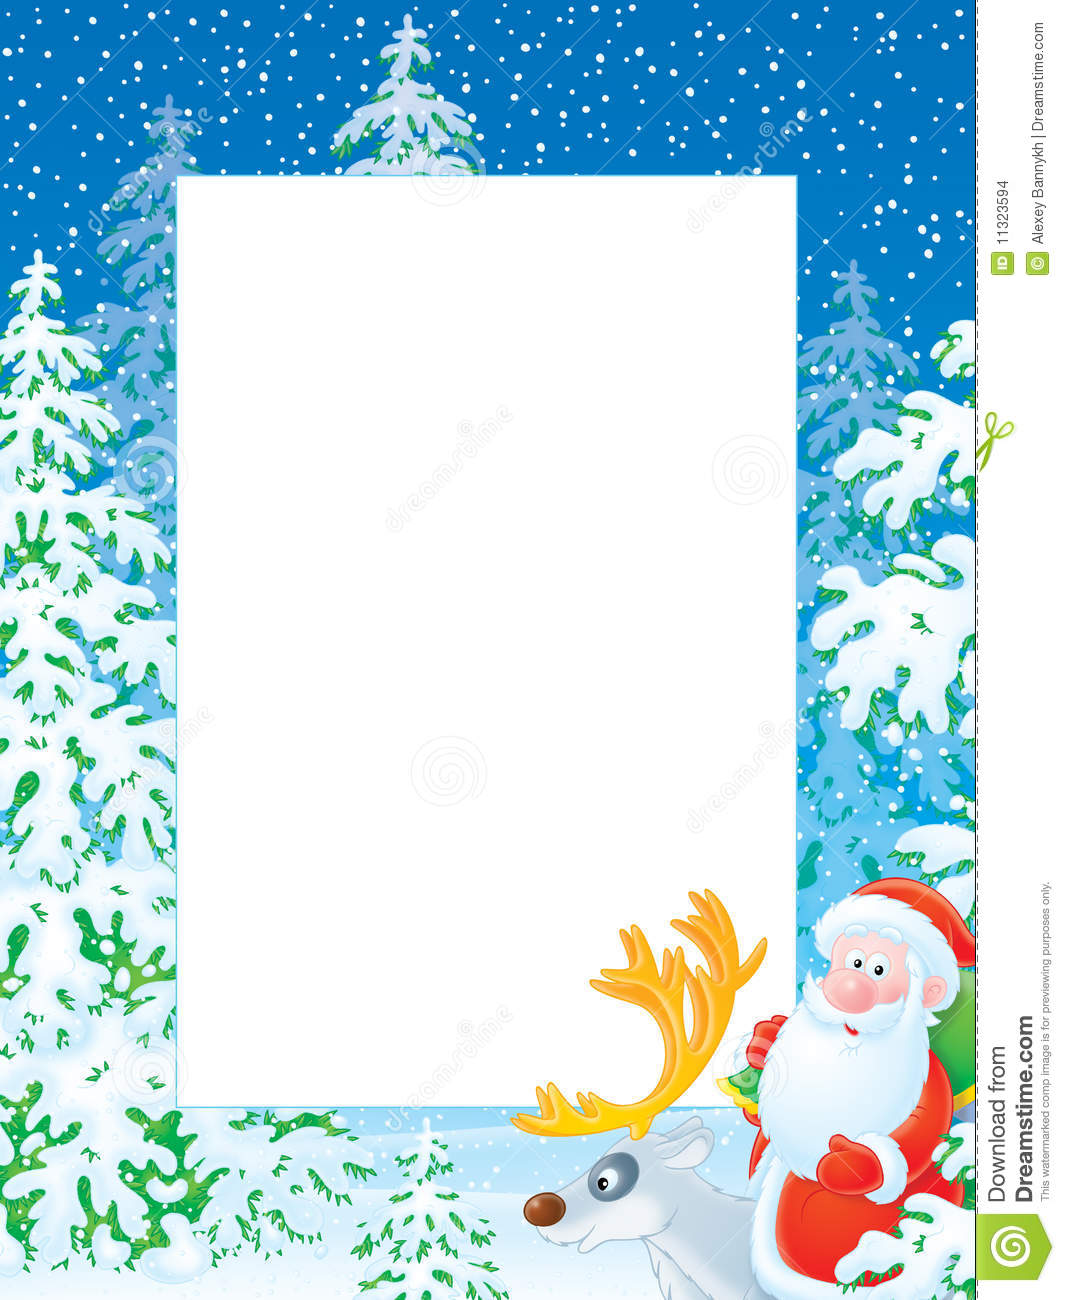 High Resolution Border With Santa Claus And Reindeer For Your Photo Or